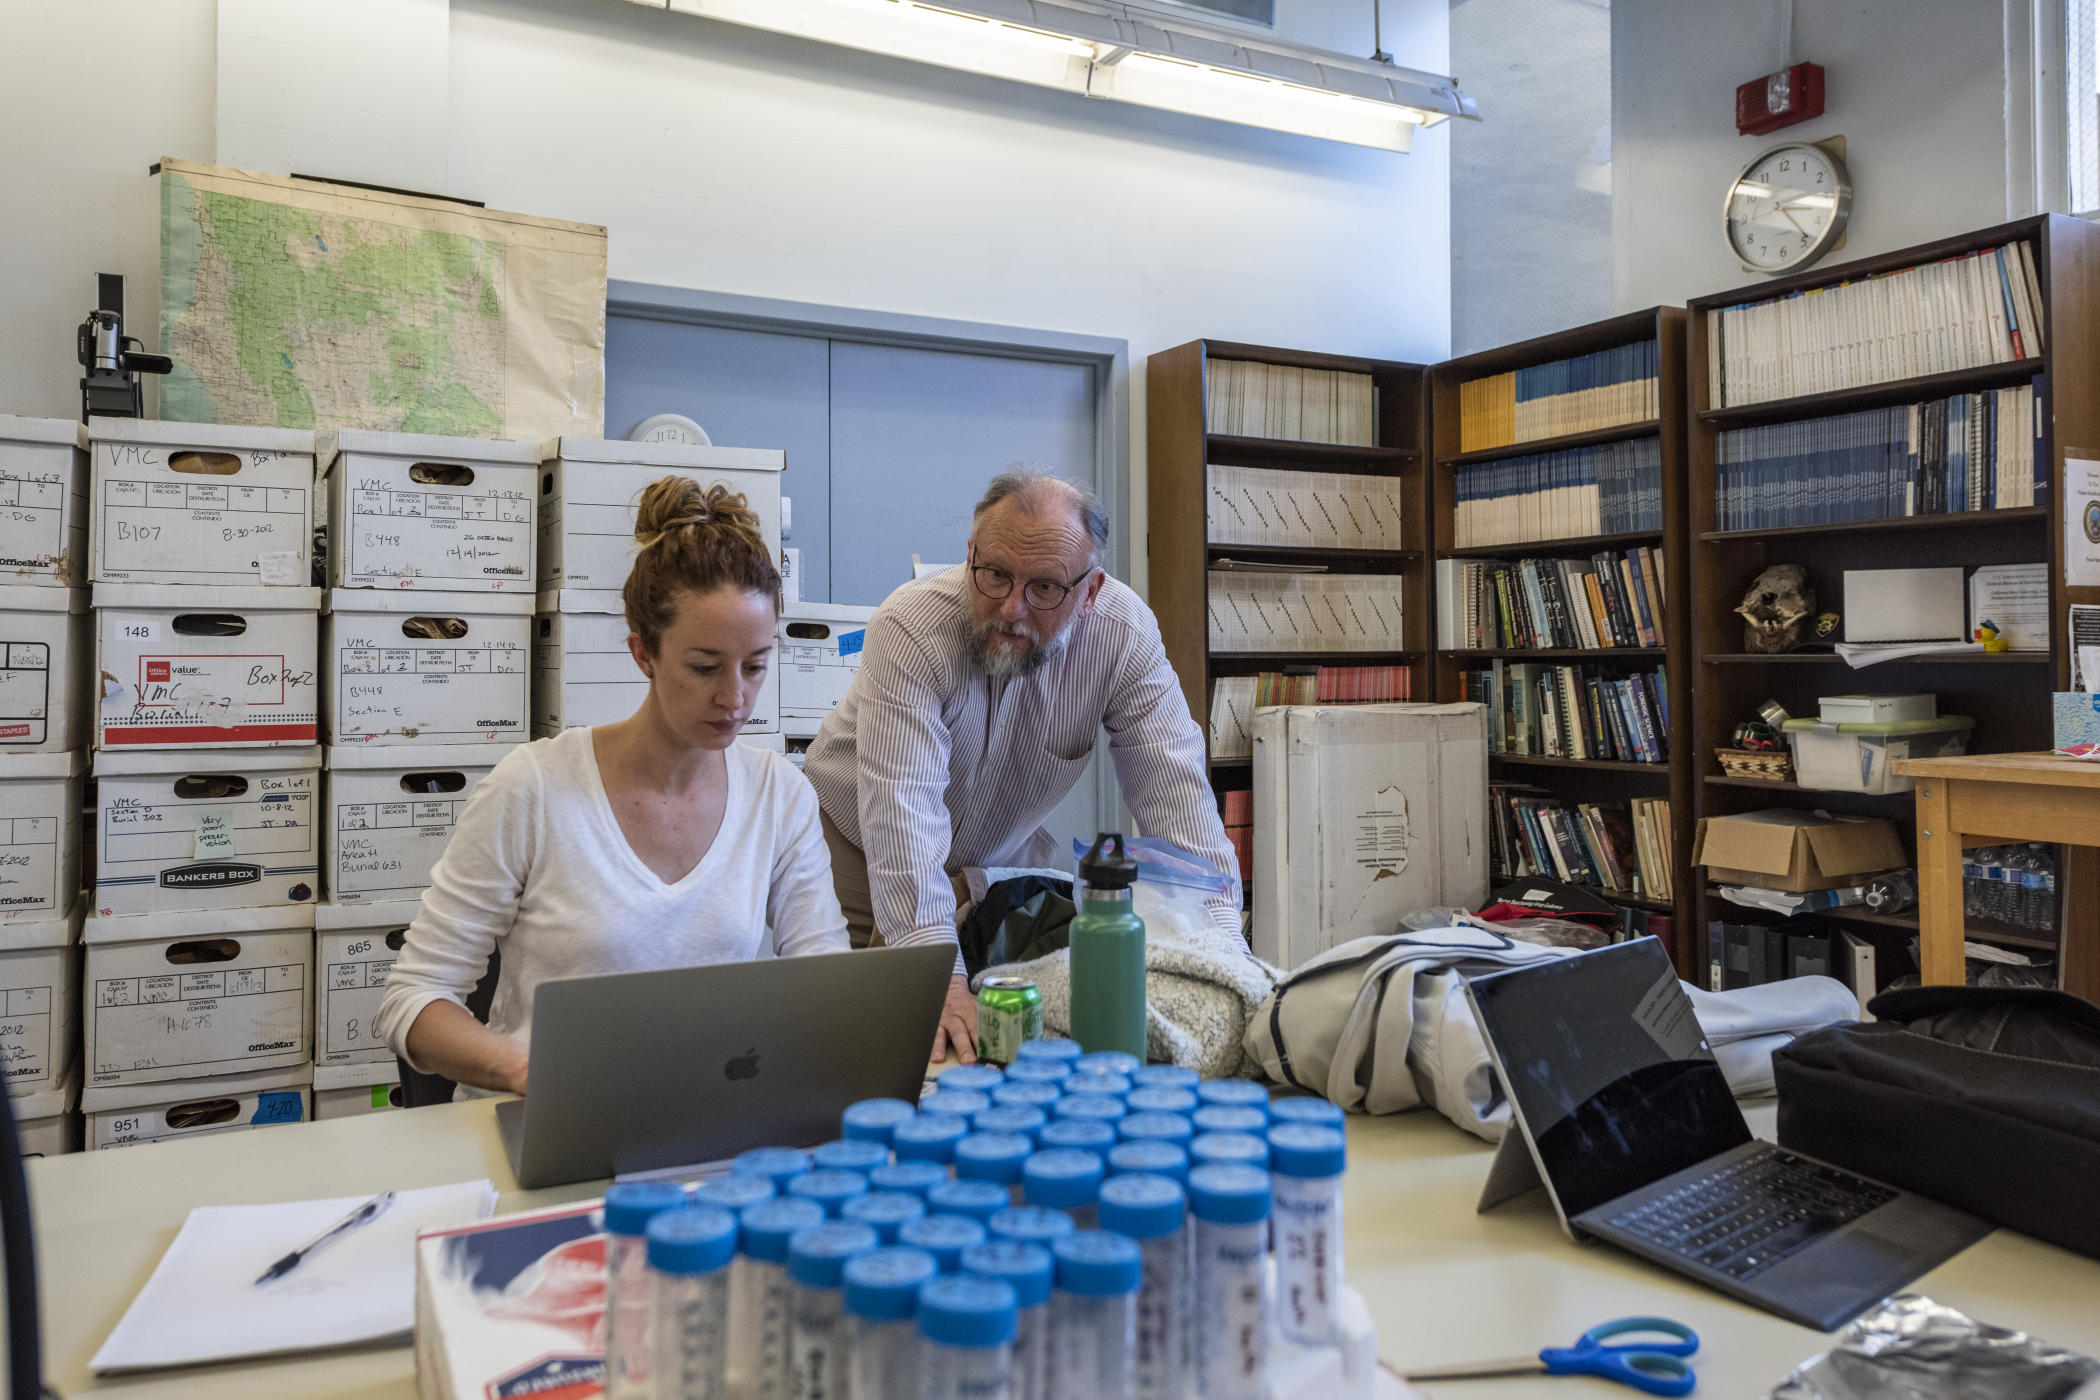 Faculty Ashley Kendell (left) and P. Willey (right) work in the Anthropology Department Human Identification Laboratory.